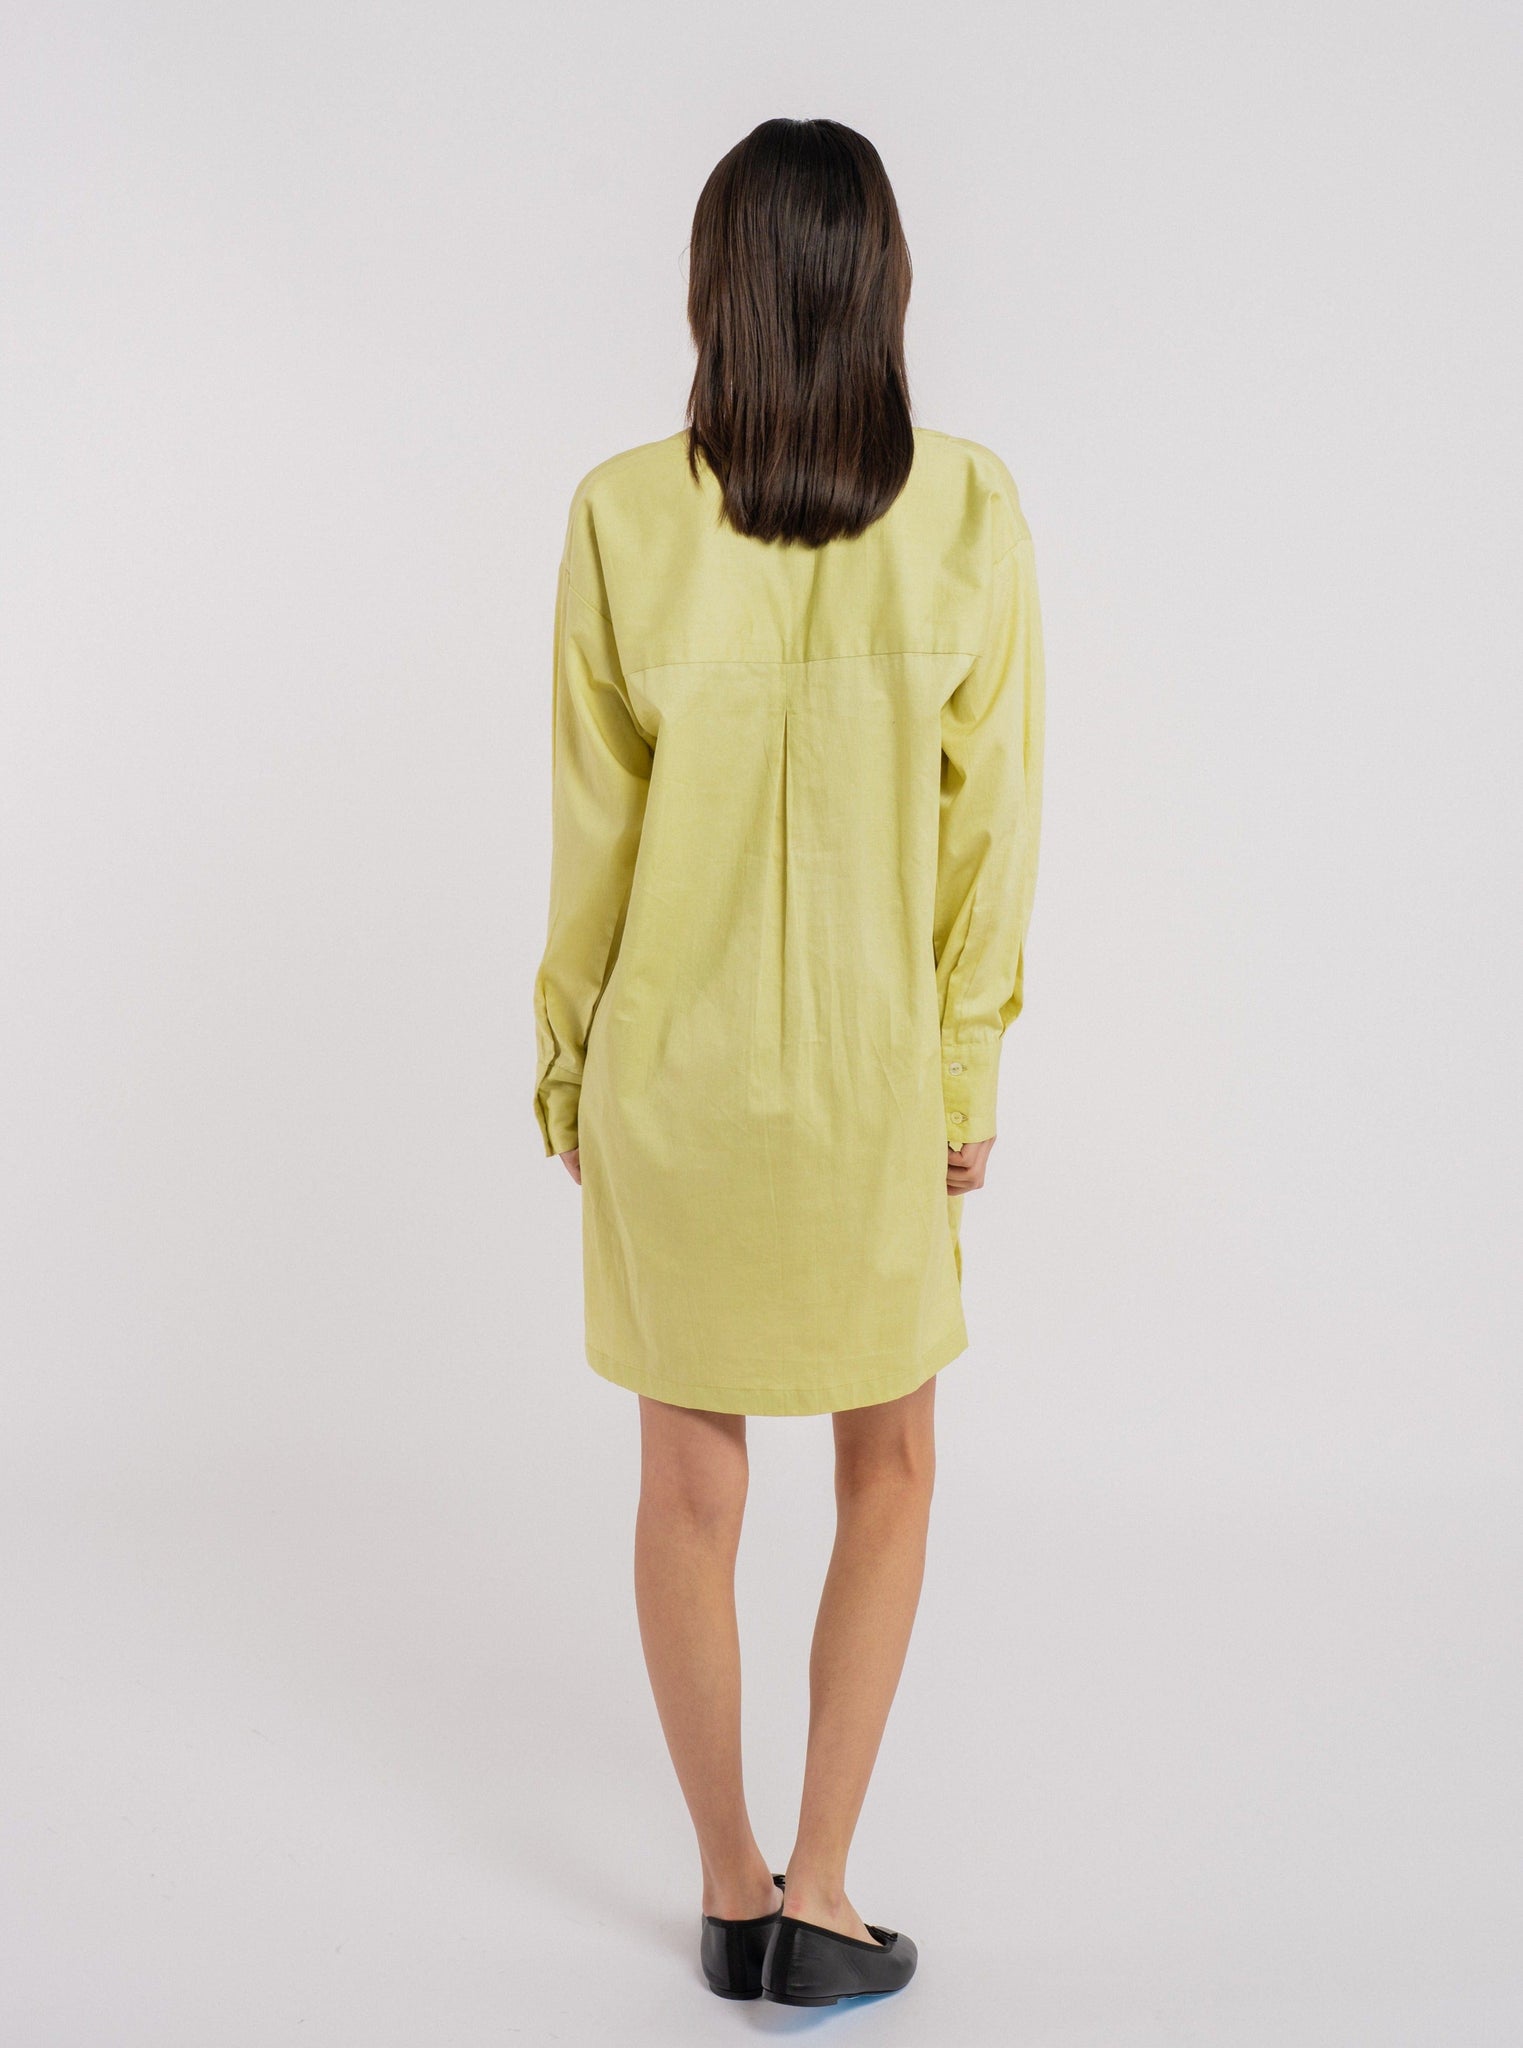 The back view of a woman wearing a Modern Tunic Dress - Celery Green.